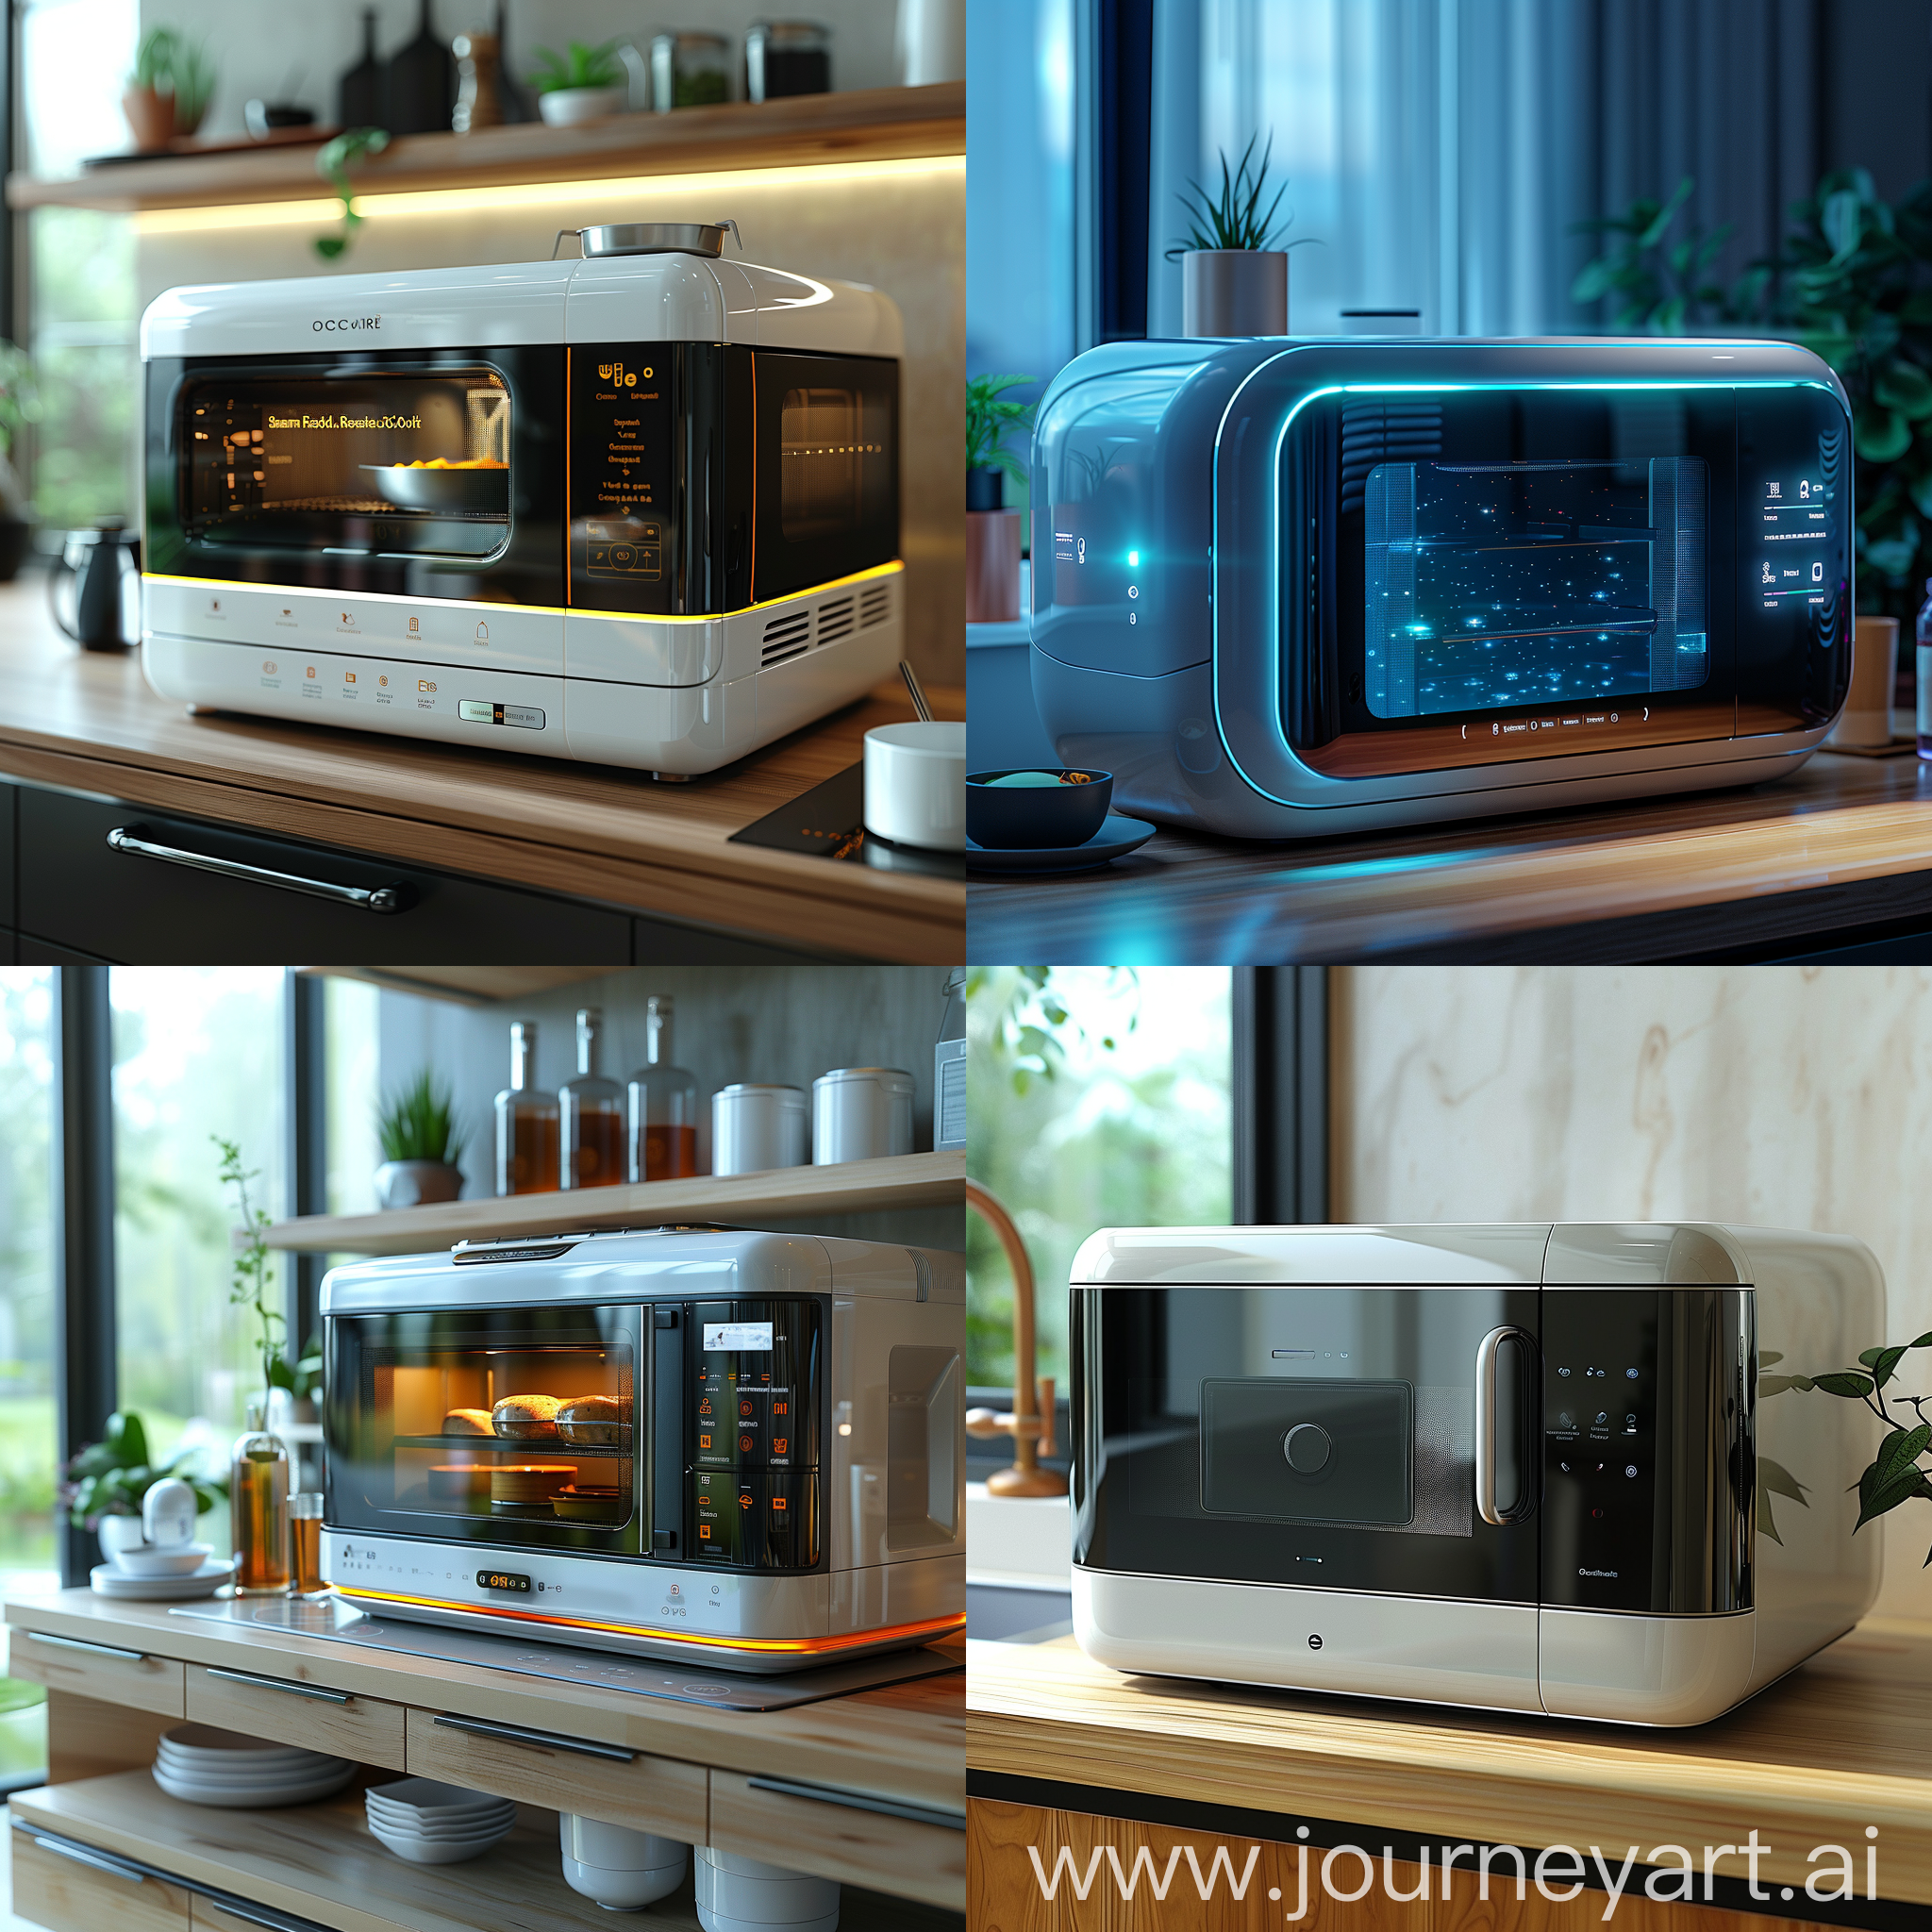 Futuristic microwave, ultramodern features, cutting-edge features, Smart Food Recognition & Auto-Cooking, Voice Control, Molecular Reconstruction, Vacuum Sealing & Sous Vide Cooking, Steam Cleaning, Integrated Air Frying, Smartphone App Connectivity, Biometric Security Lock, Self-Reordering Function, Built-in Projector & Recipe Display, octane render --stylize 1000